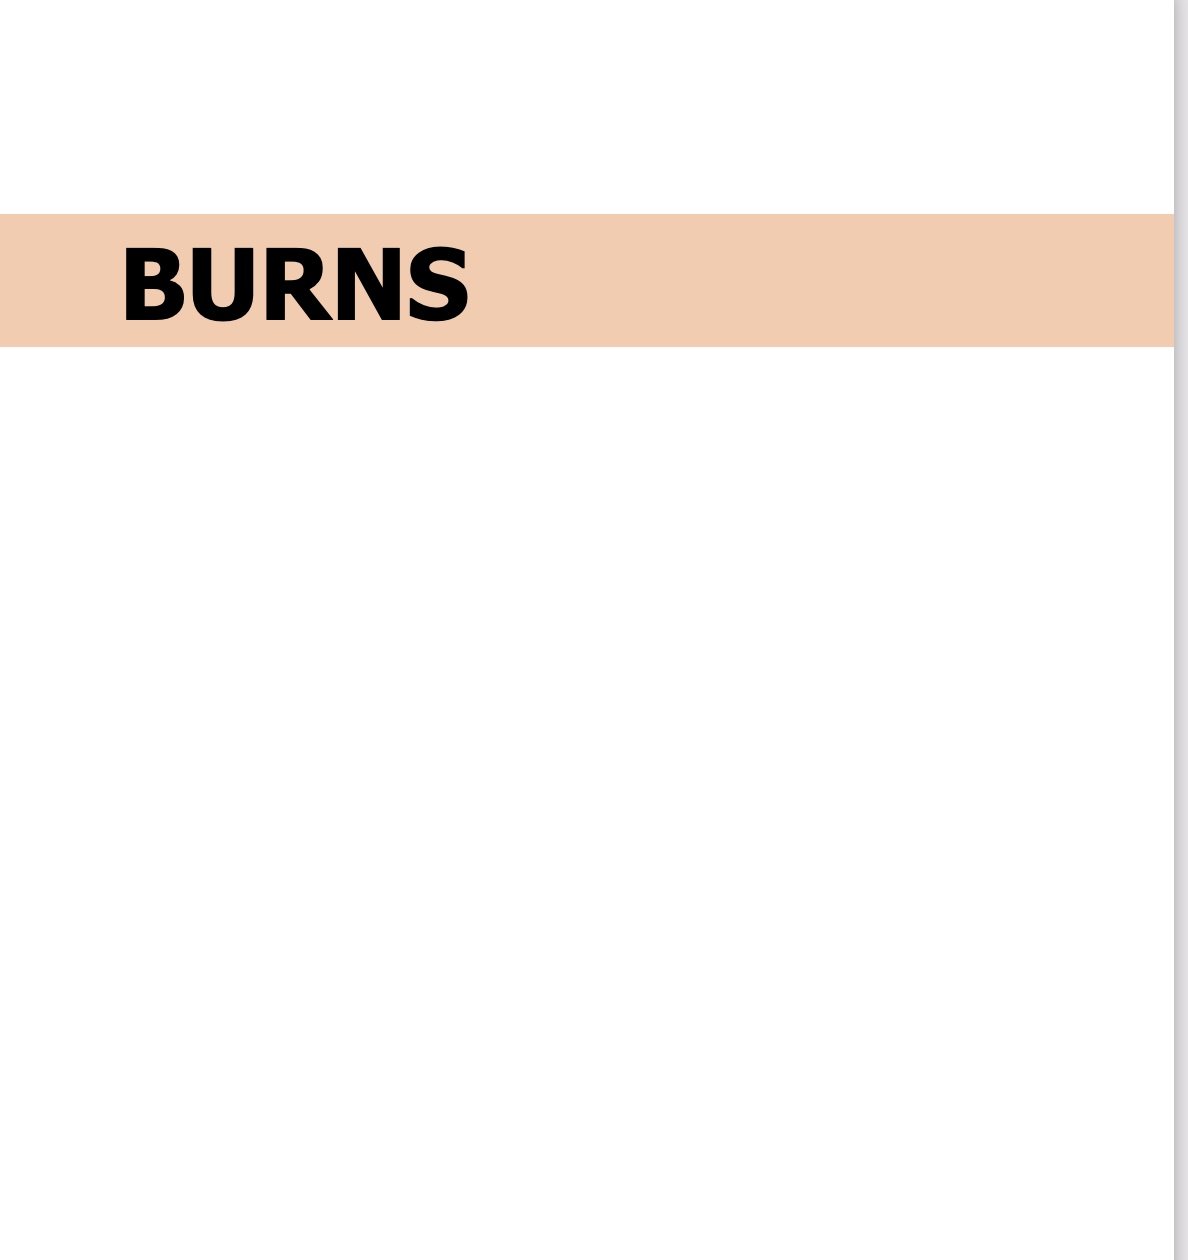 Management of burns - total care